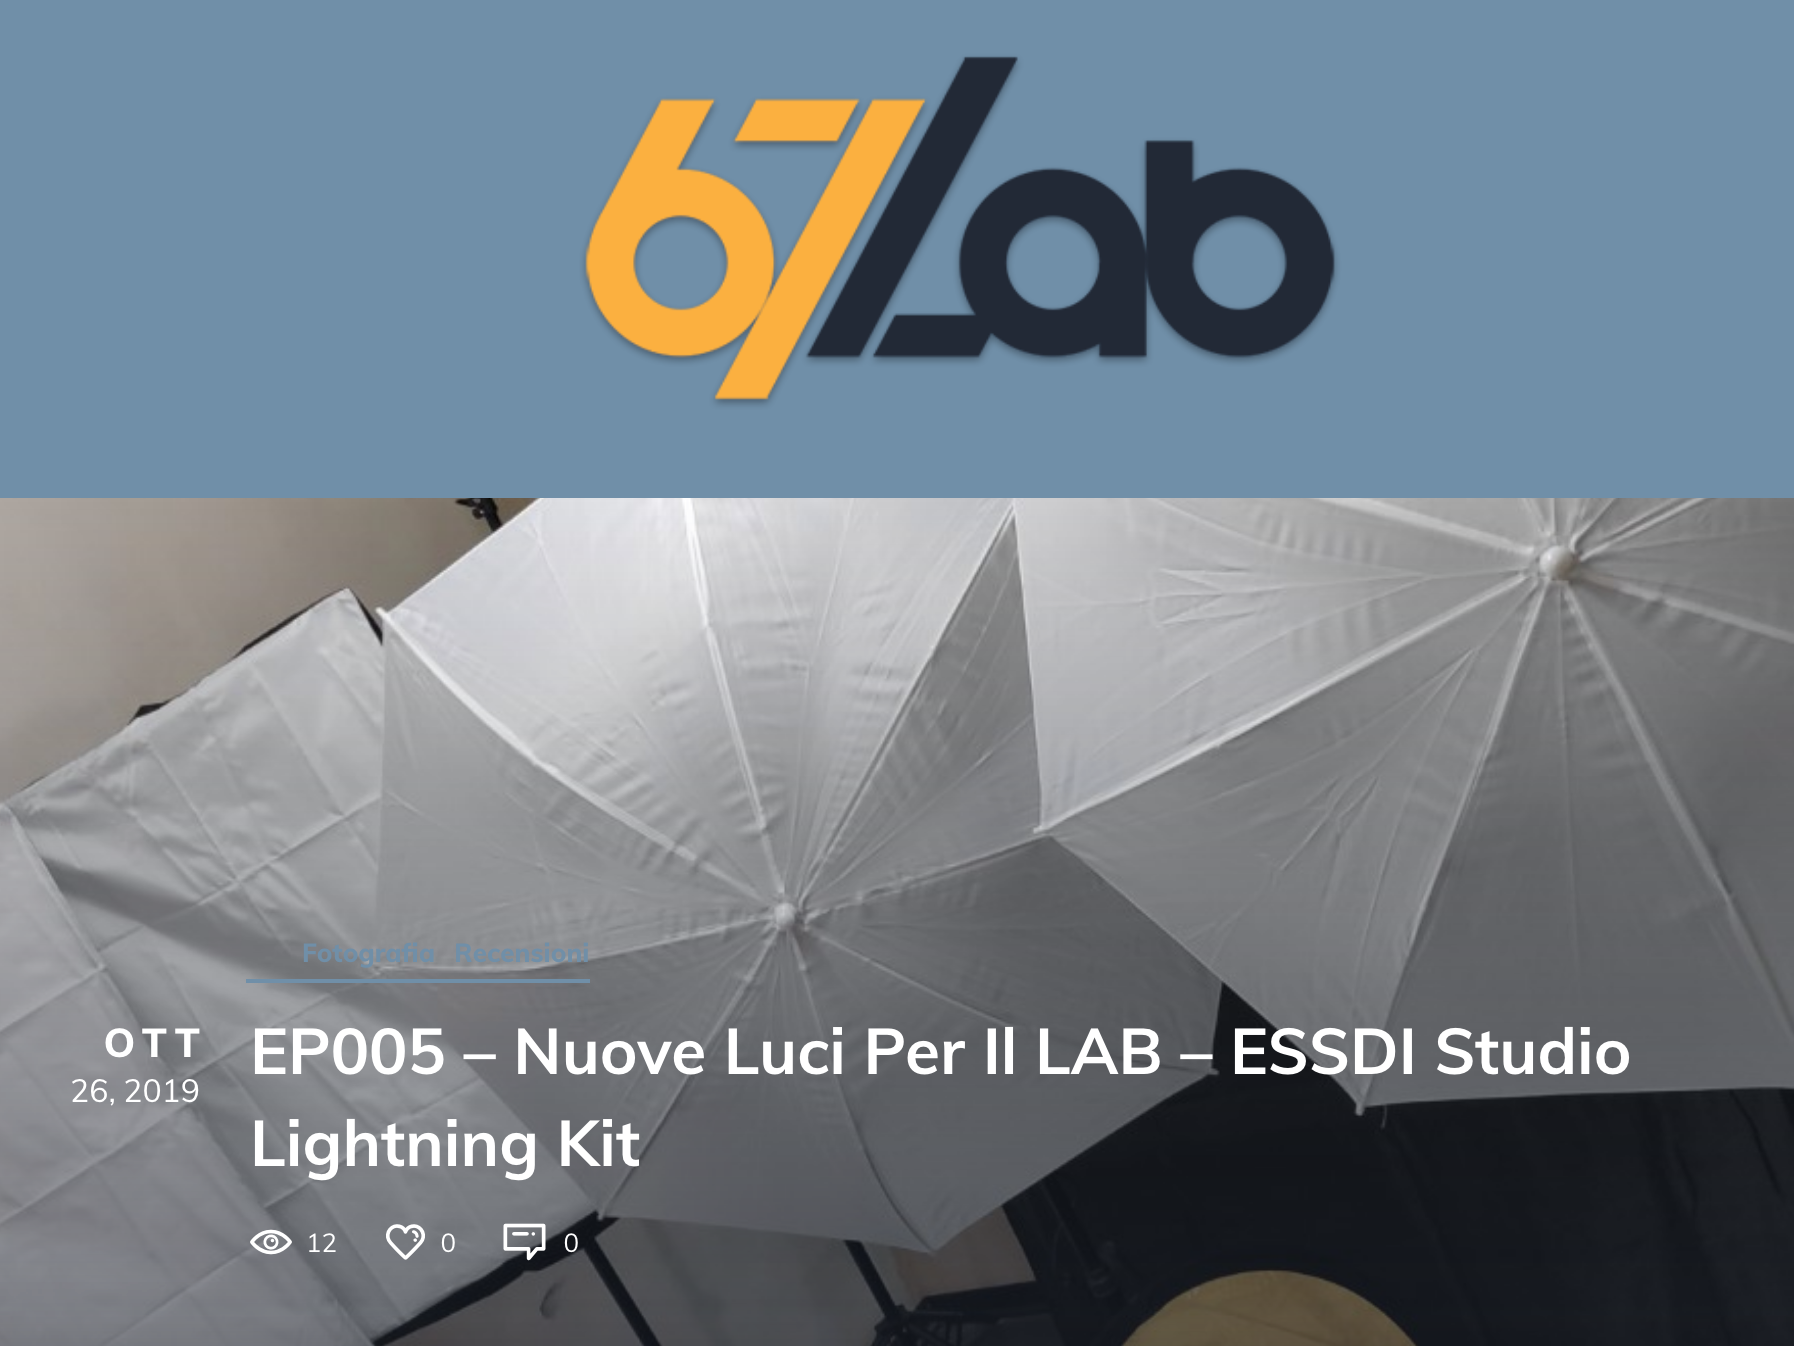 67lab – EP005 Nuove Luci